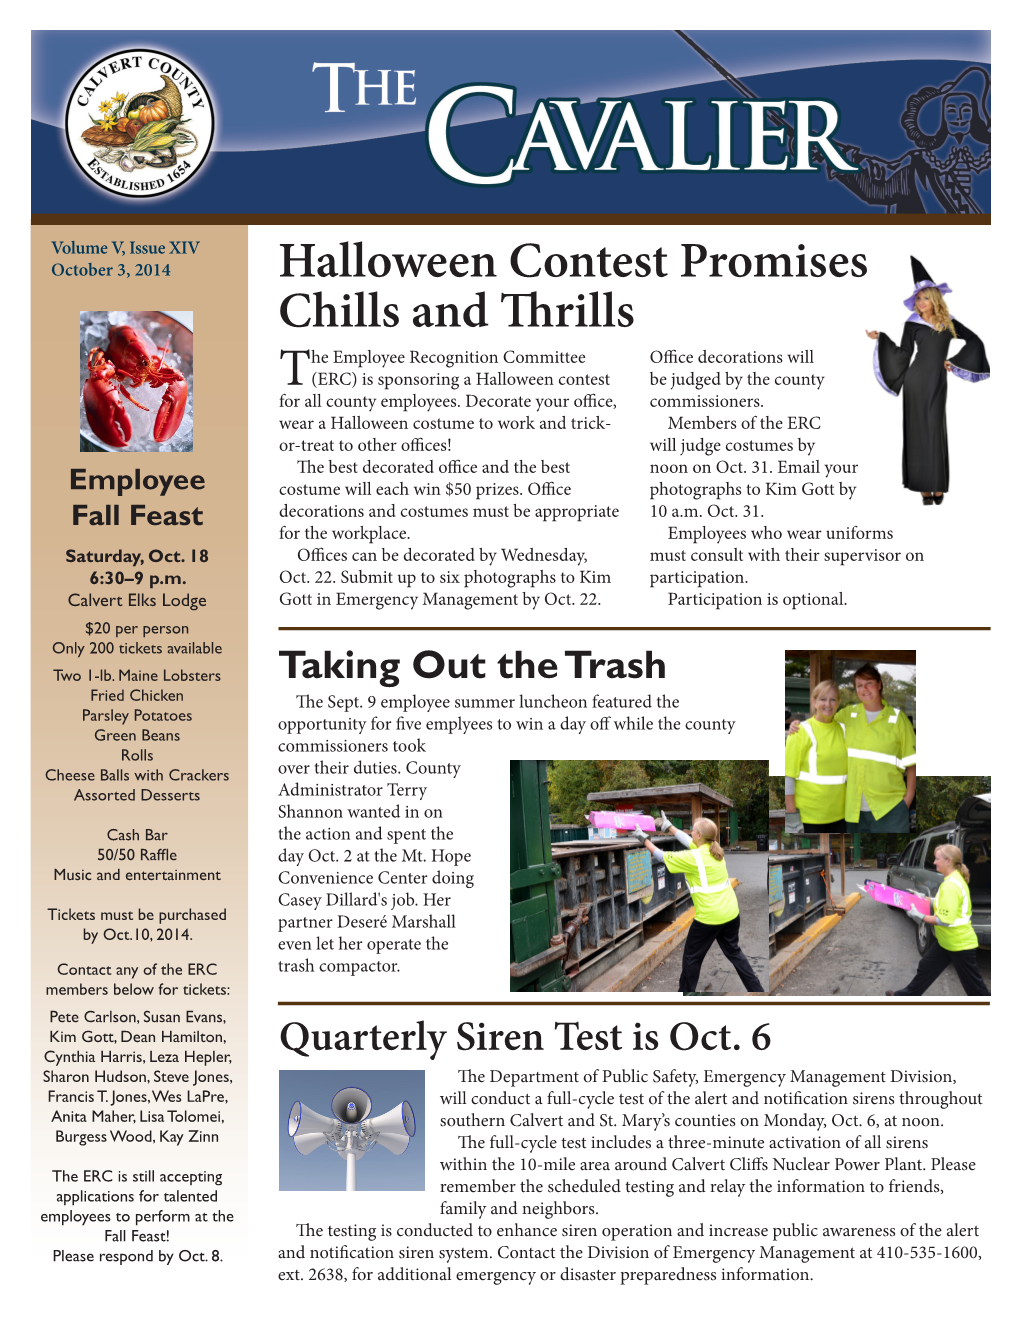 Halloween Contest Promises Chills and Thrills